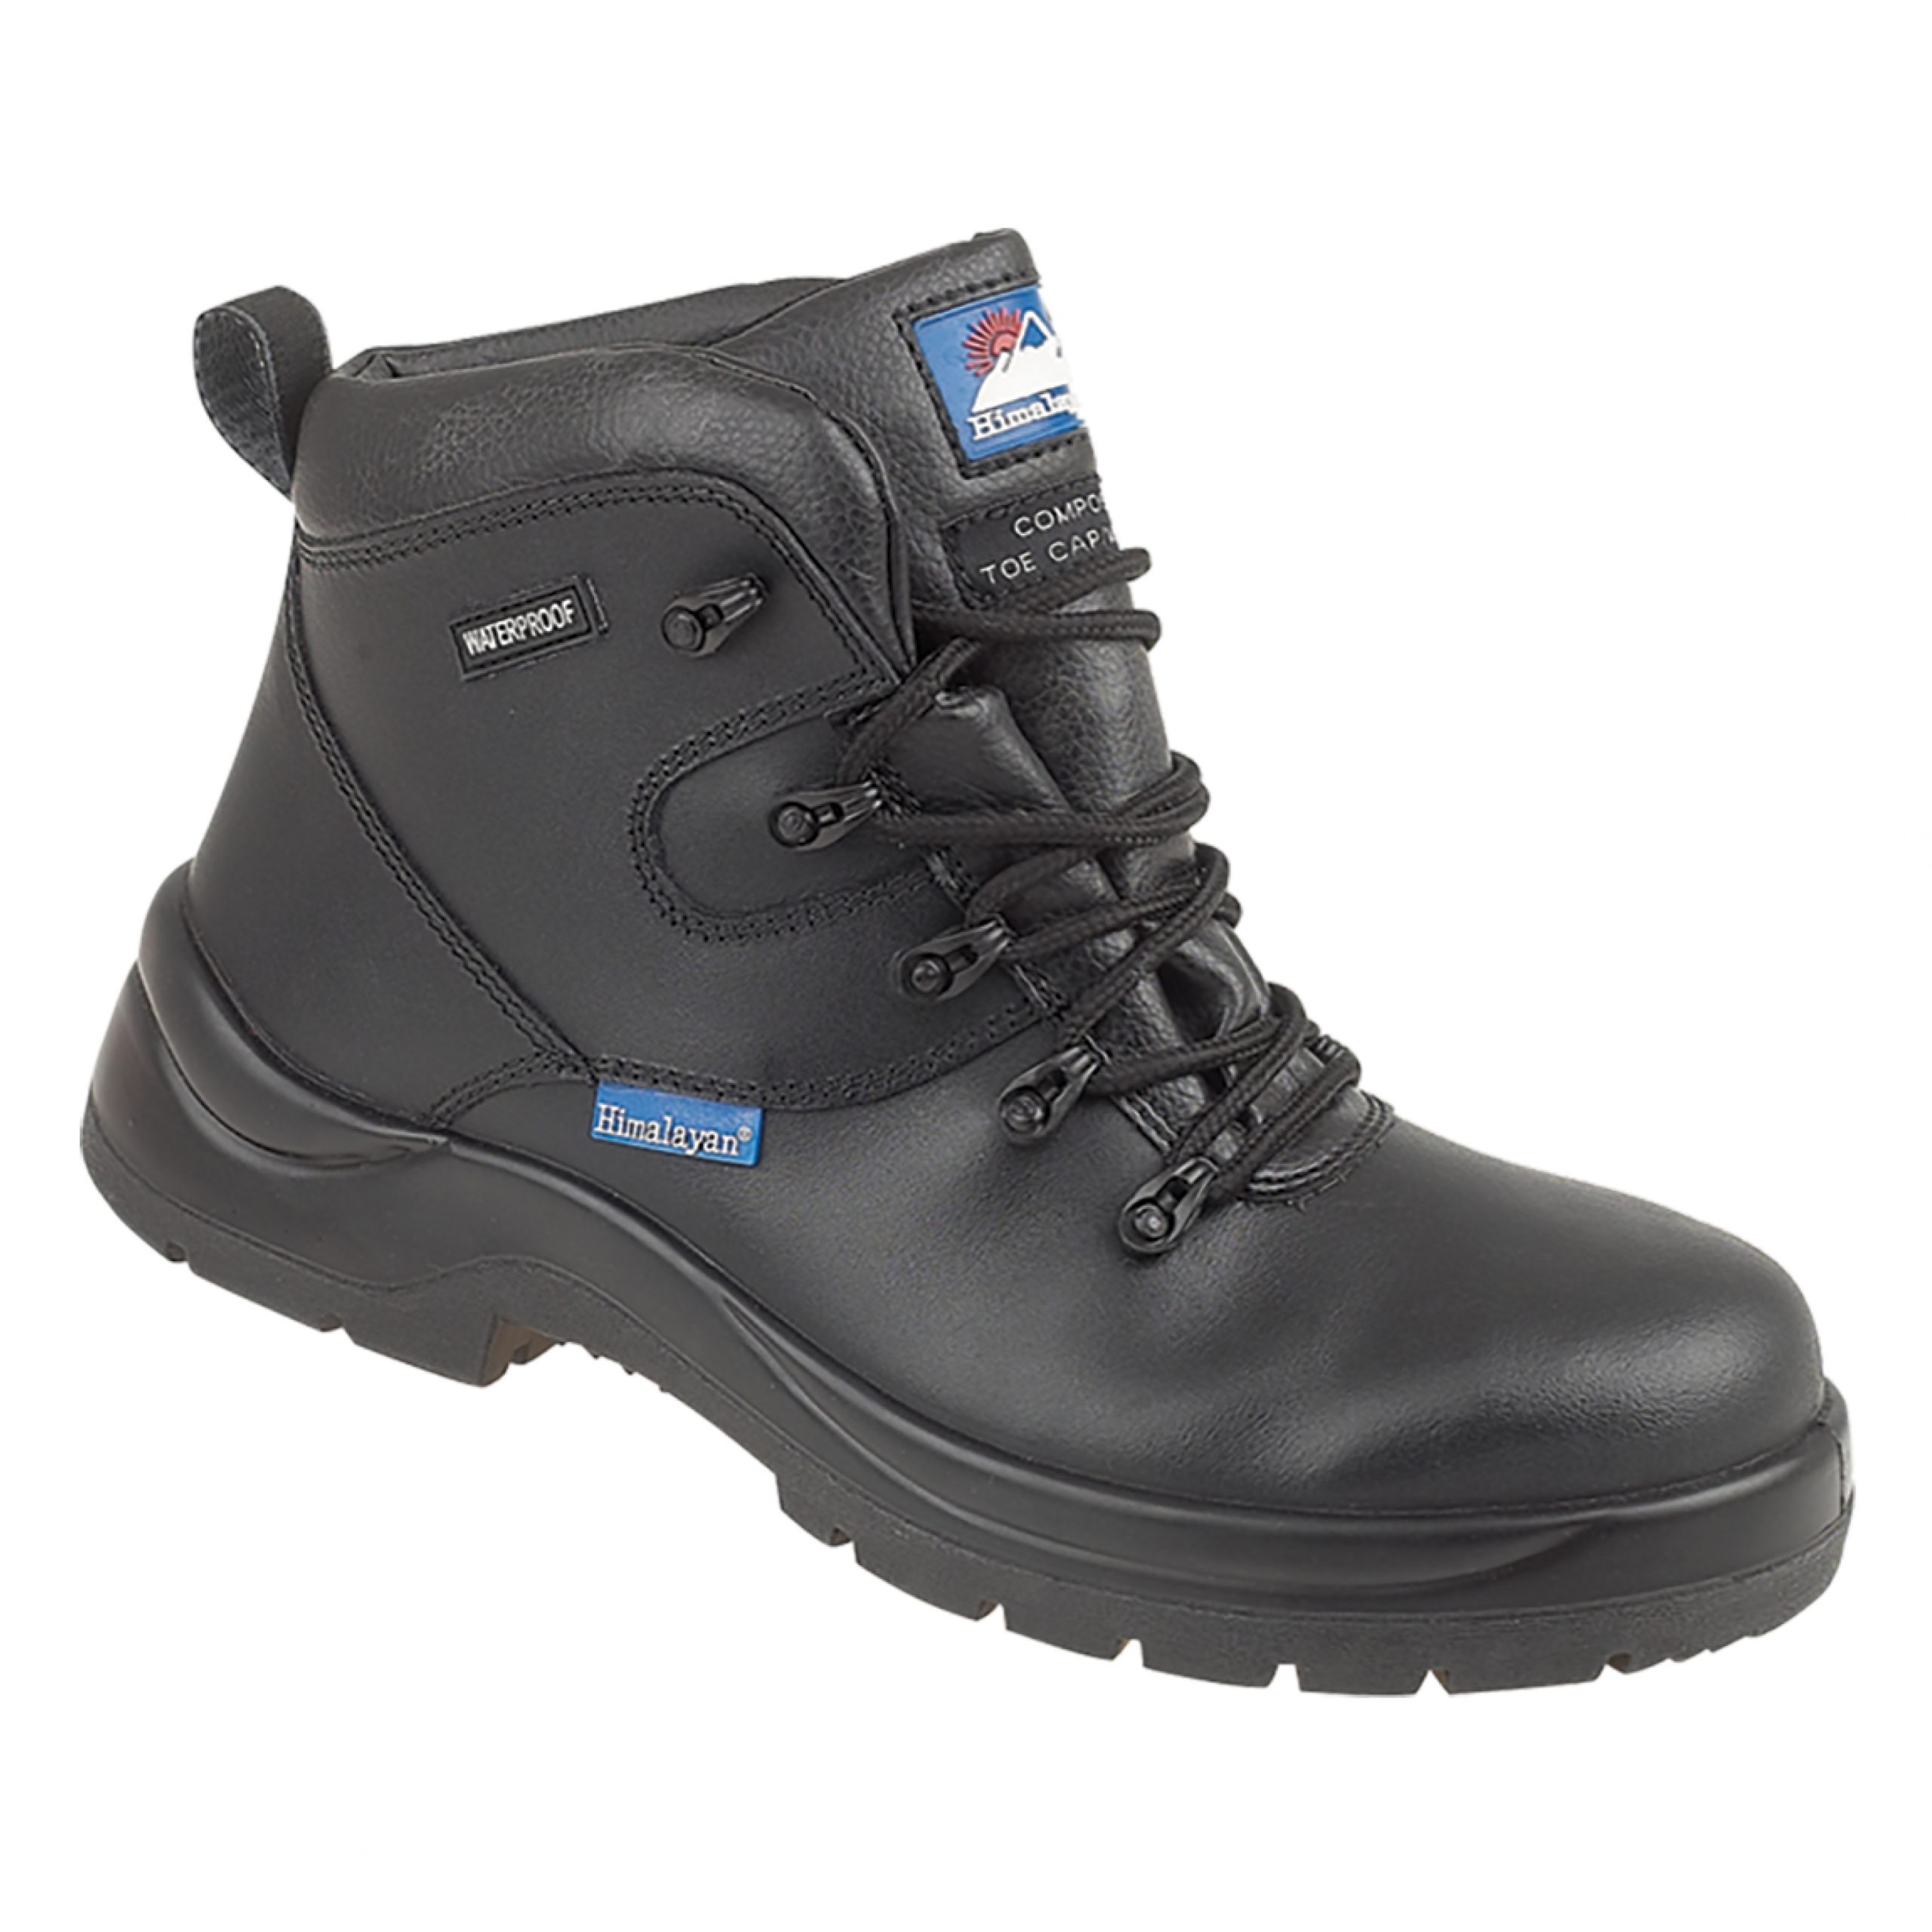 Himalayan 5120 S3 Compoite HyGrip Black Waterproof Safety Boot